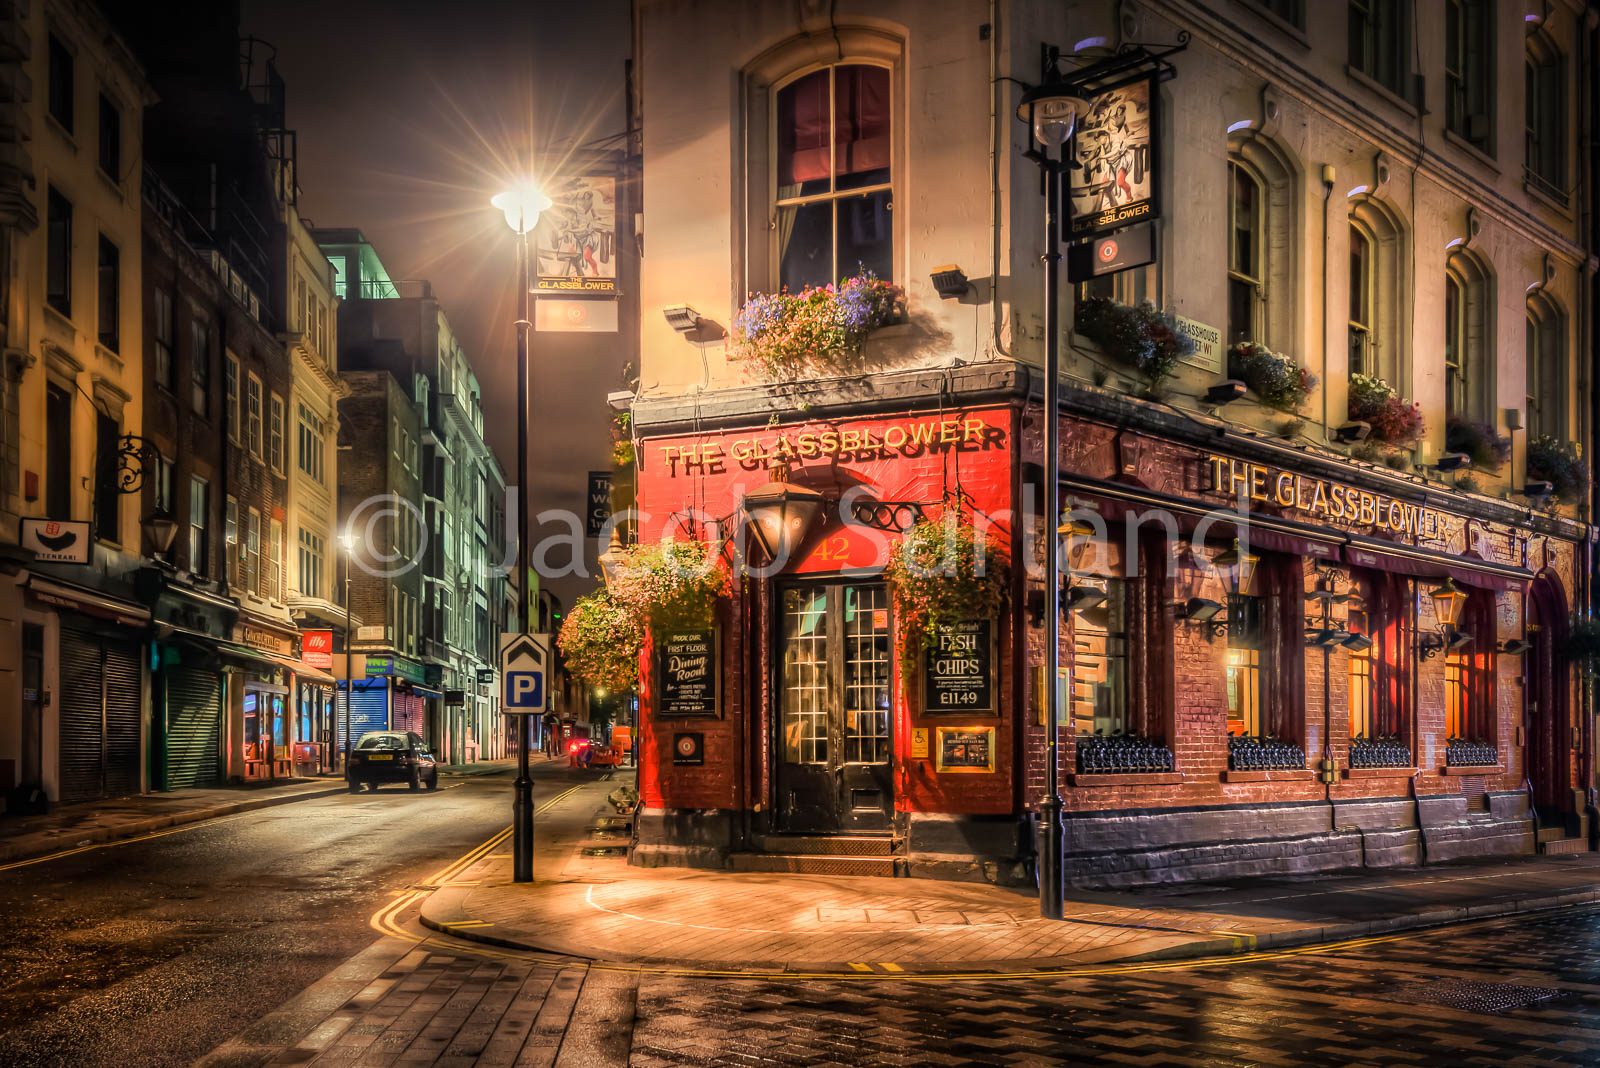 You find London empty at 5.30 am. Glassblower pub is placed very close to the famous Regent Street. The first people were on their way to work, and the first London buses drove around on their routes. A few window cleaners were cleaning the windows and polishing brass of various shops and pubs. Photo by: Jacob Surland, www.caughtinpixels.com